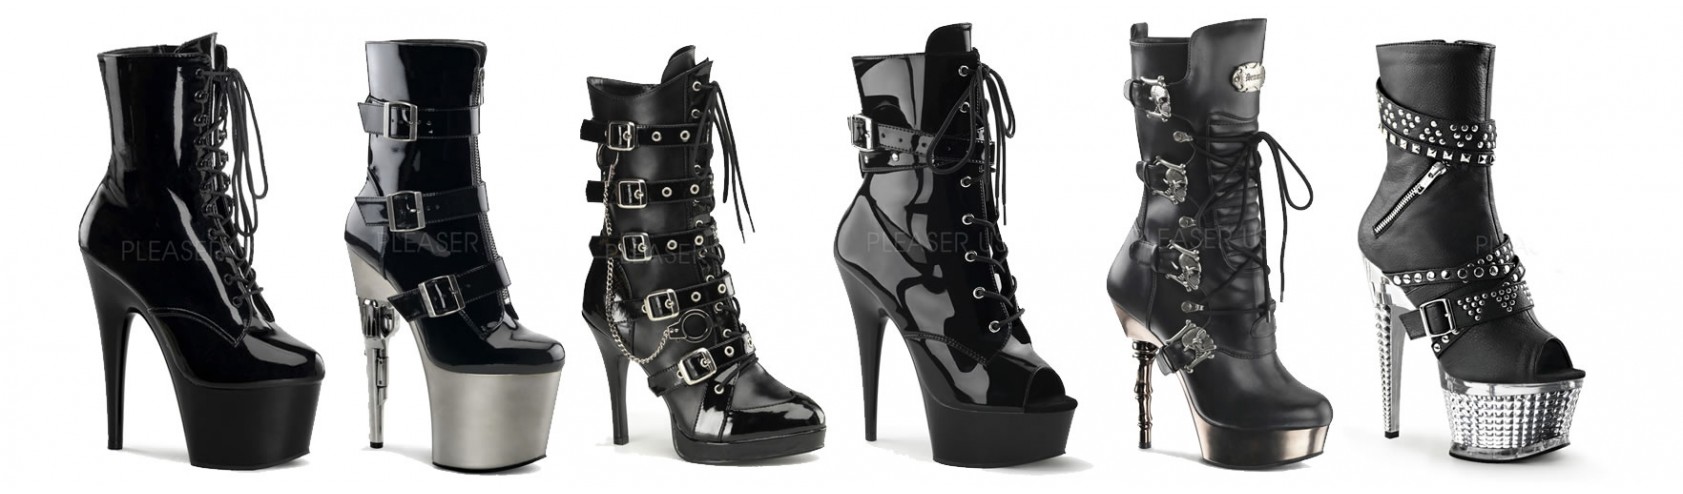 Ankle High Boots :: Pole Dancing Boots :: Pleaser Boots :: High Heel Boots :: Exotic Footwear